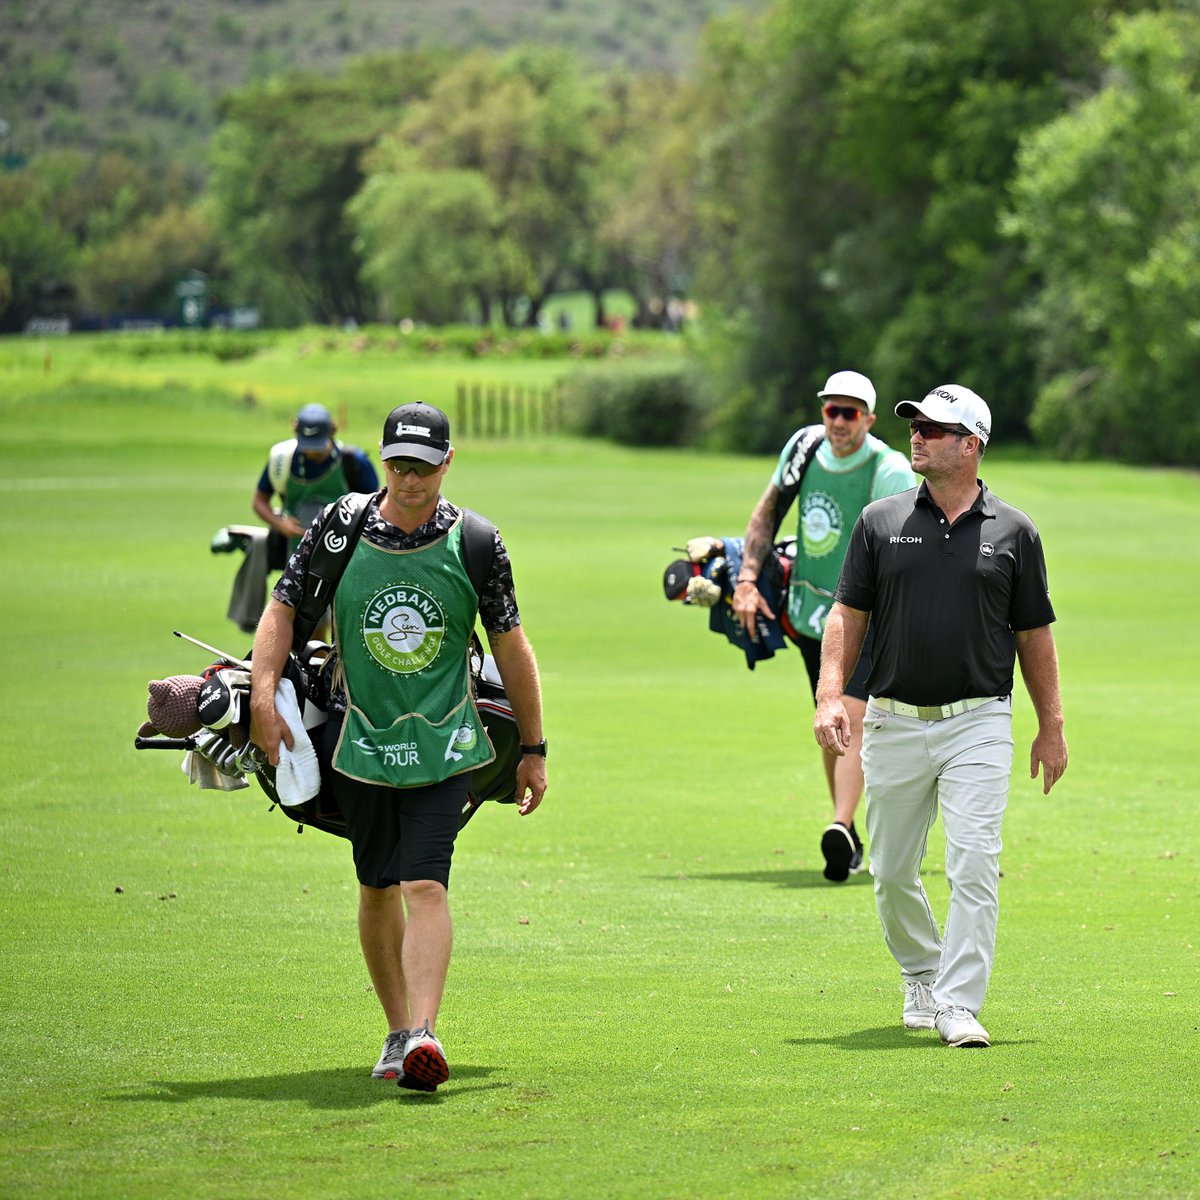 𝐔𝐏𝐃𝐀𝐓𝐄: The final round of the Nedbank Golf Challenge will resume at 14:20 (CAT) ⛳

#NGC2022